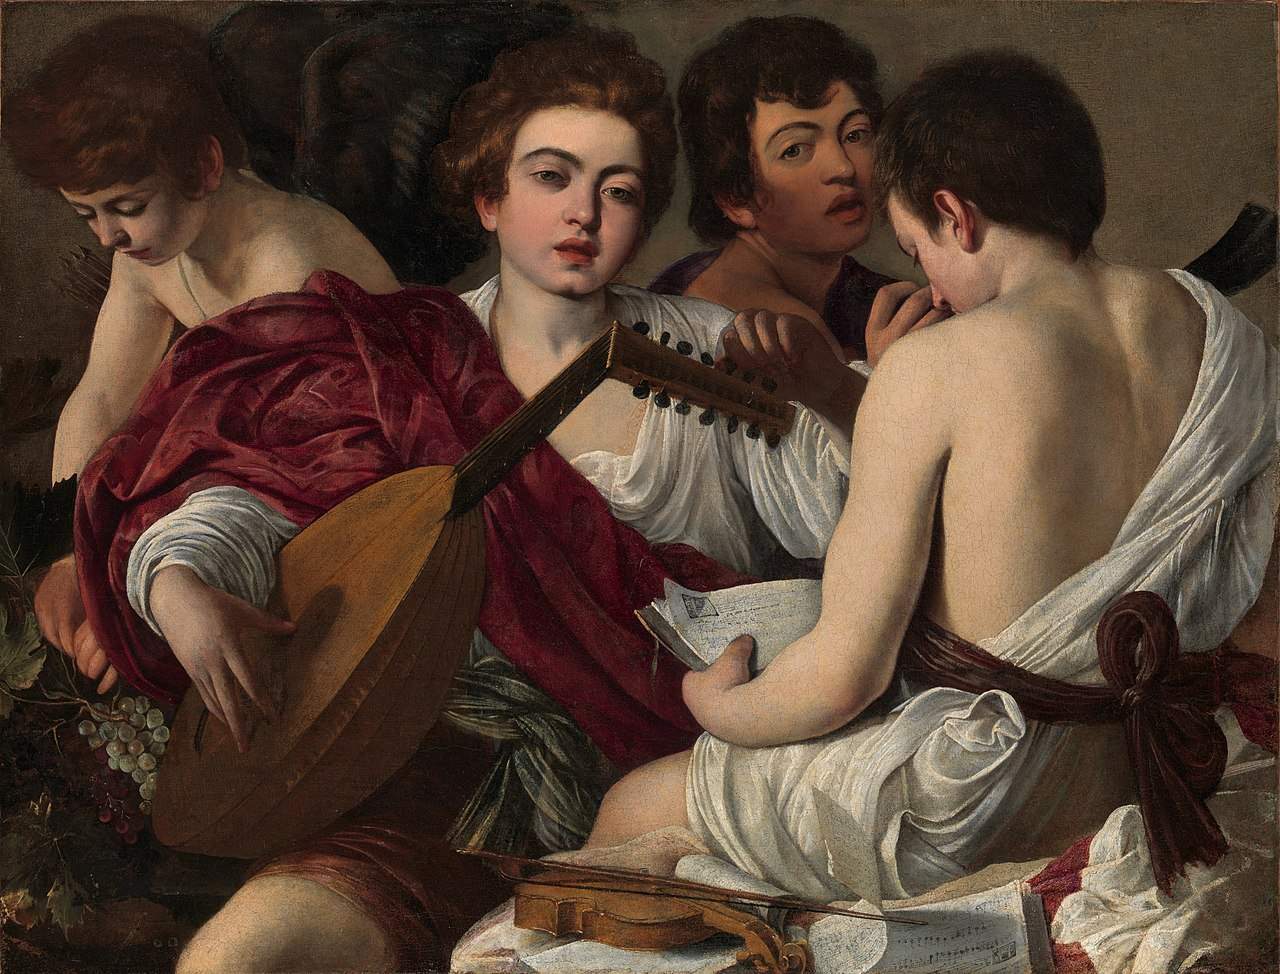 Bergamo wants to rise again with a Caravaggio. The musicians are on loan from the Metropolitan in New York.